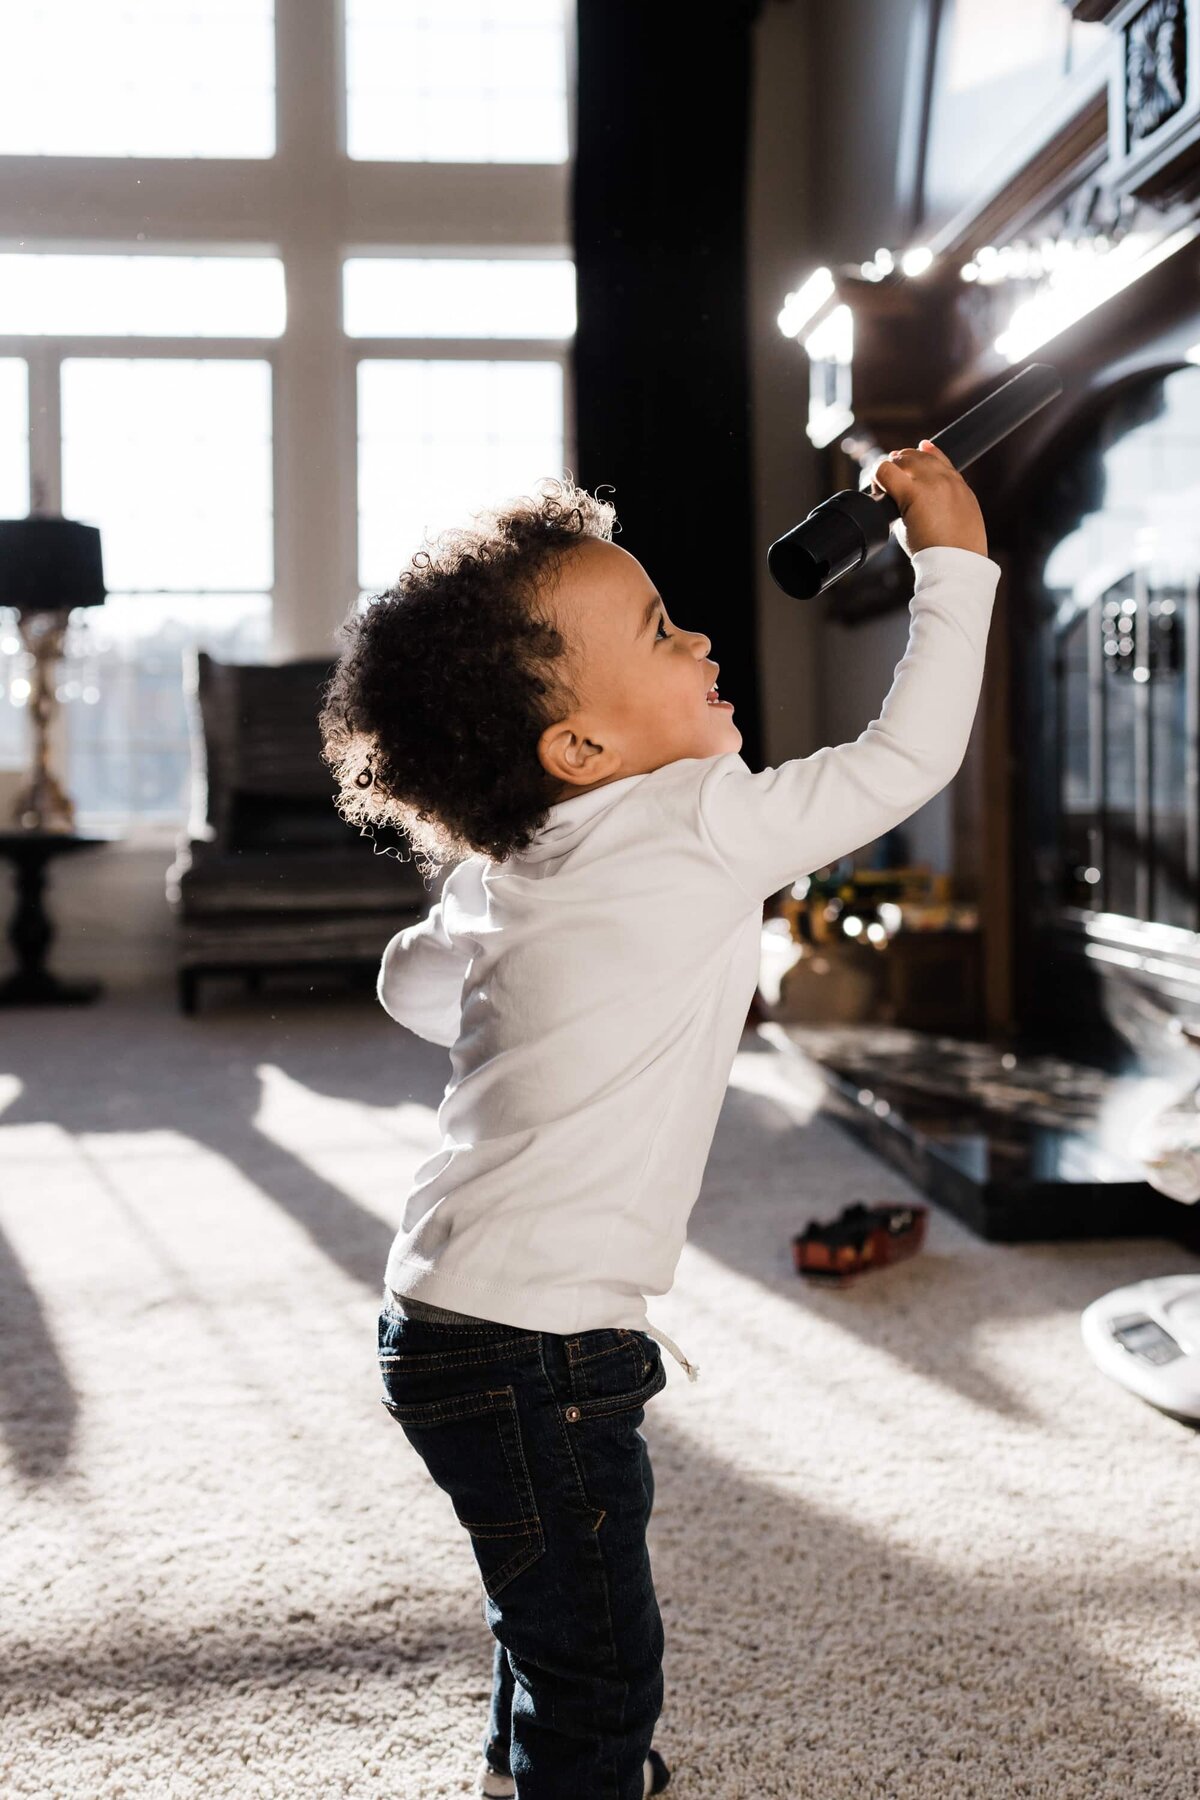 A young child reaching up toward a television remote with sunlight streaming through windows in the background during a DIY family photoshoot.